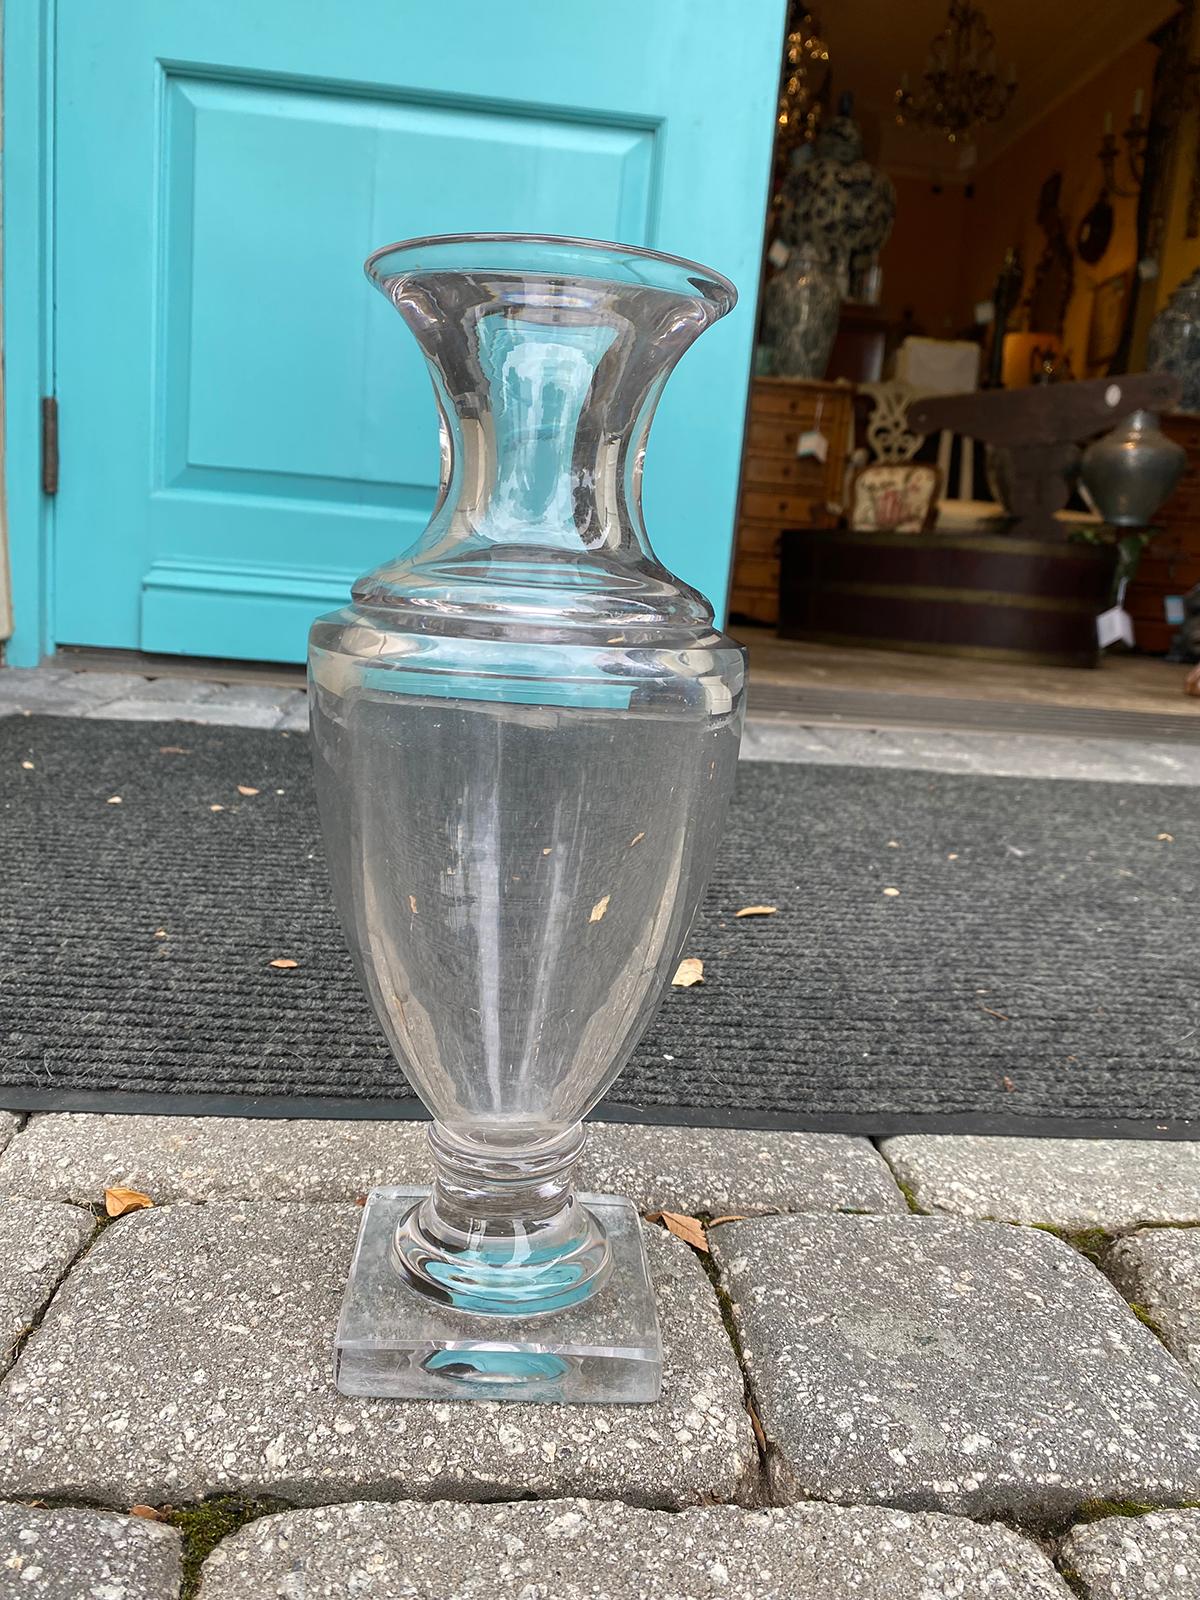 Possibly 19th century neoclassical crystal urn / vase. One small chip at one corner of the base.